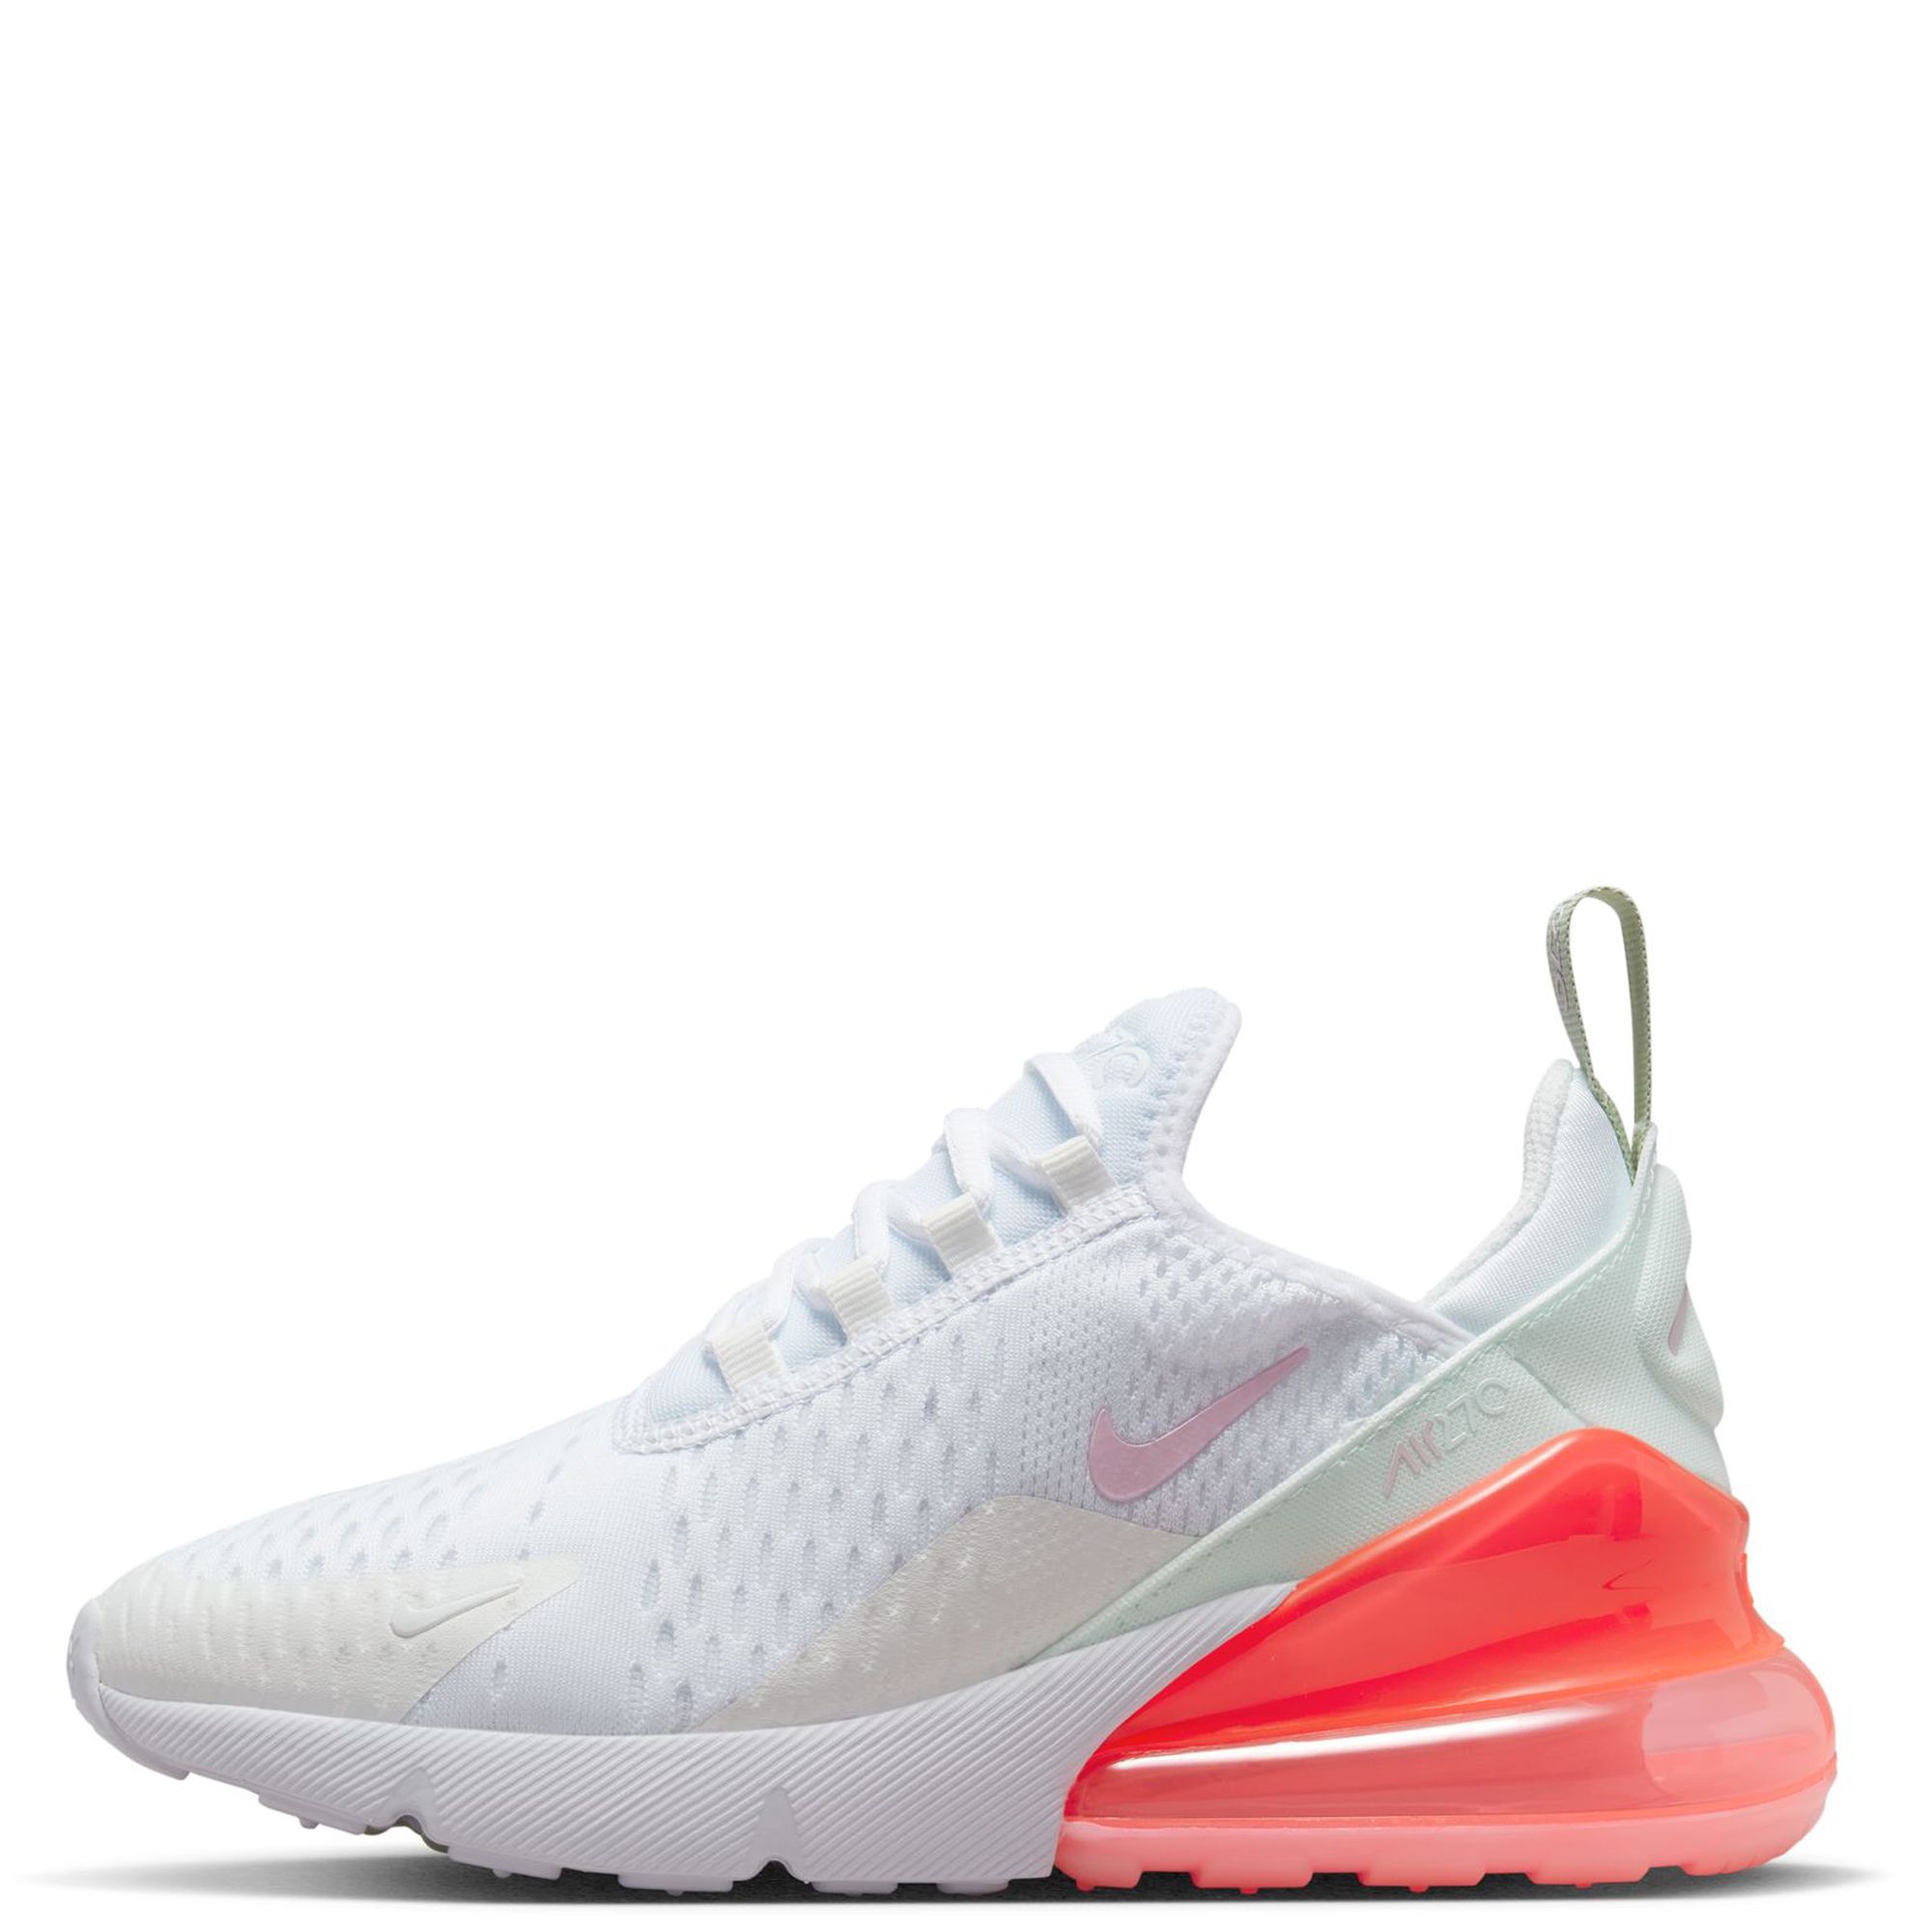 white pink and green air max 270